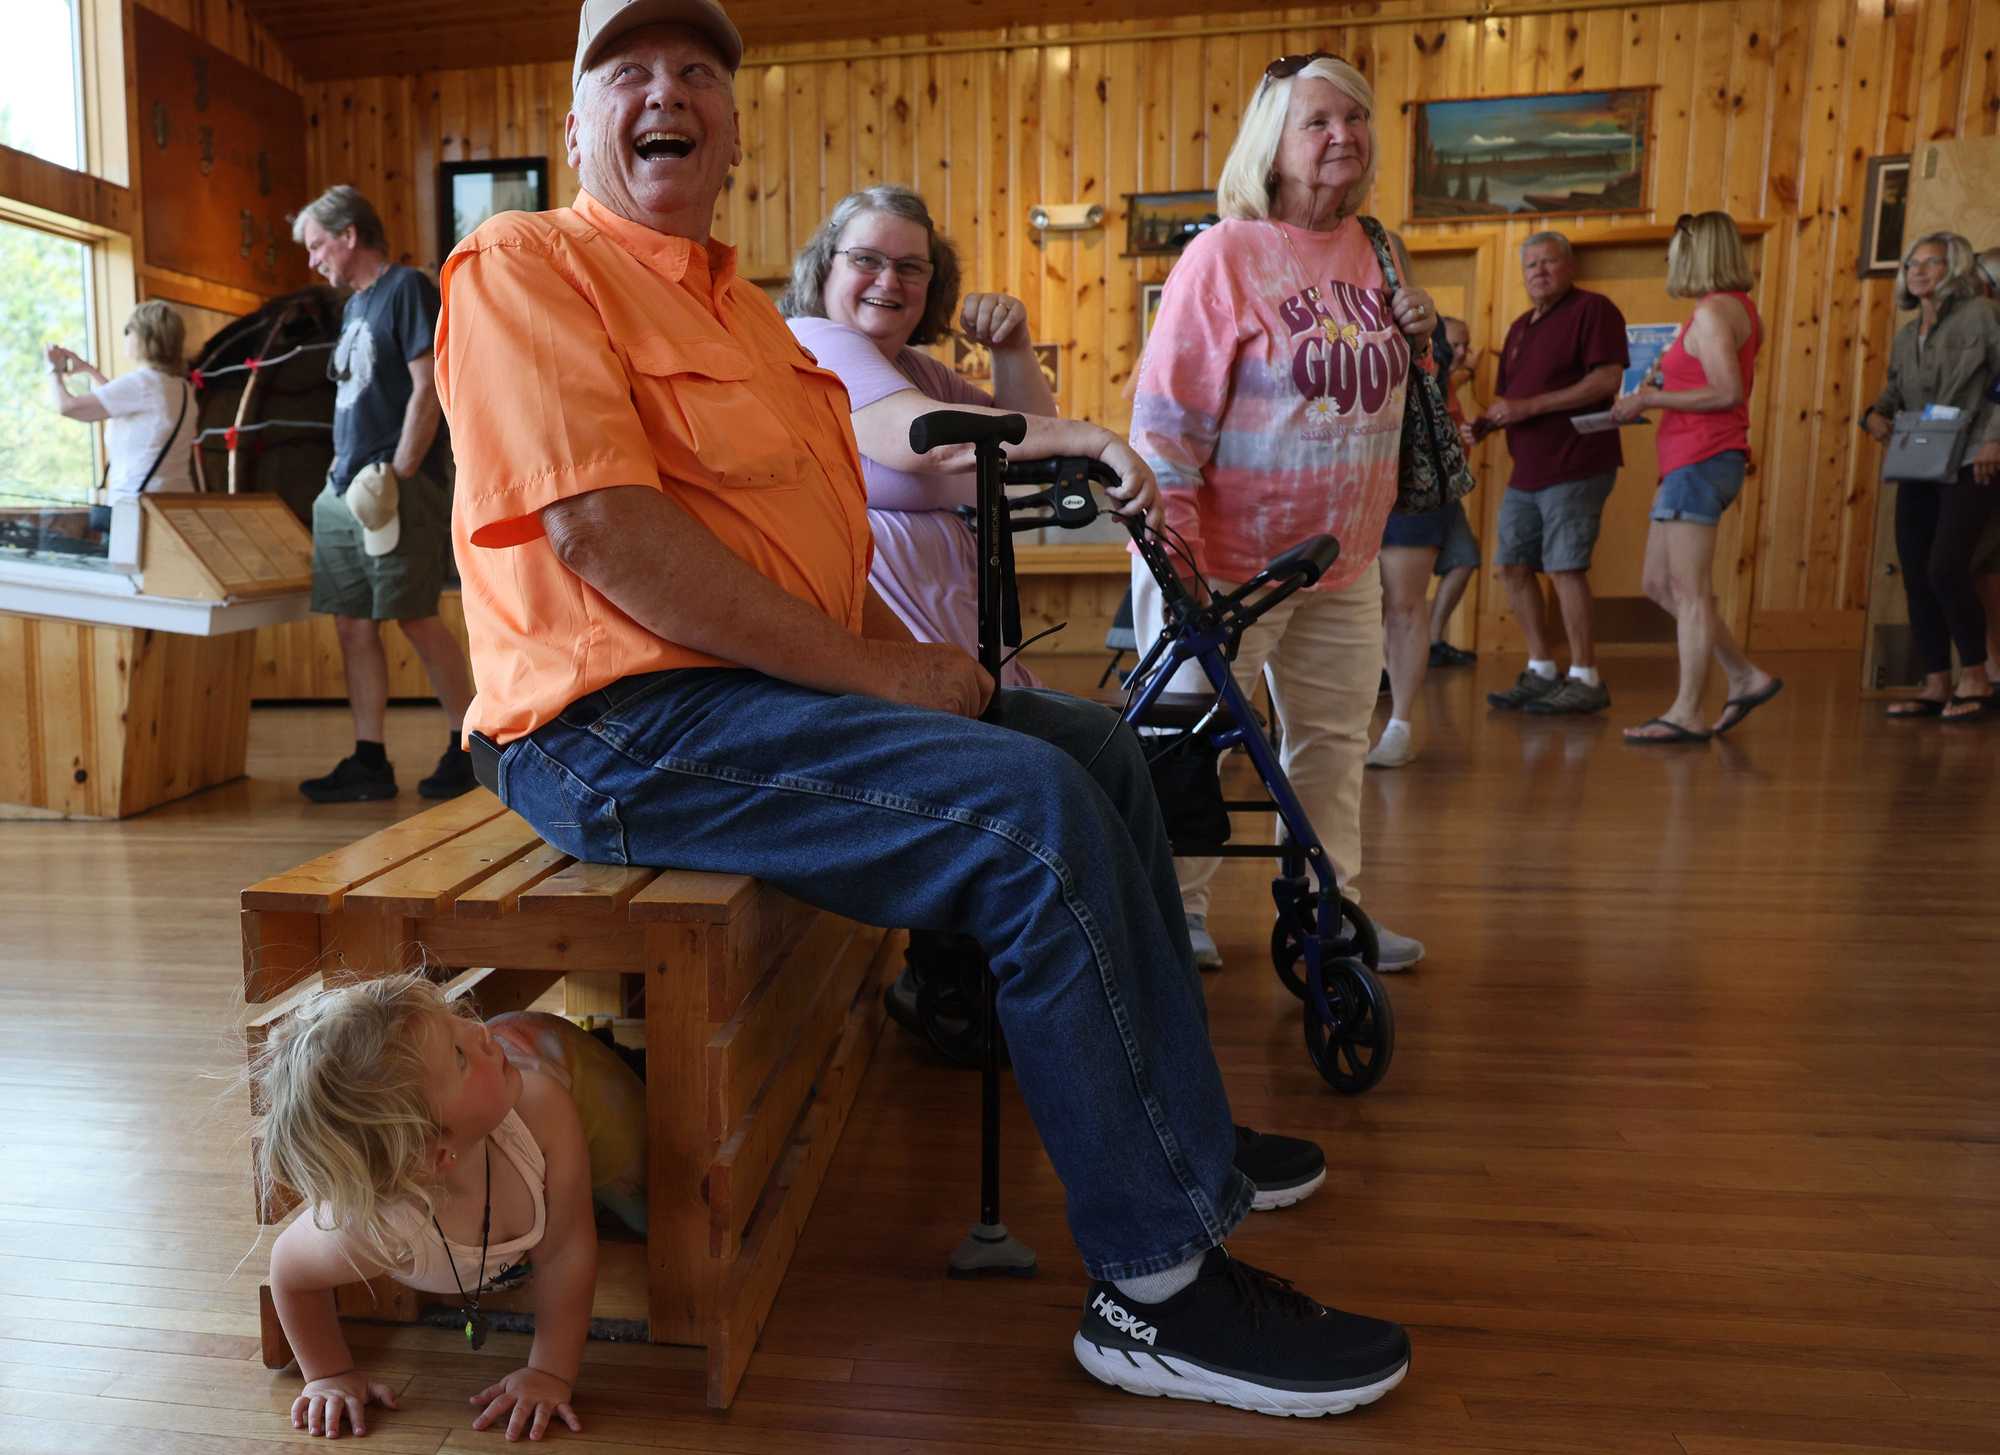  A visitor to the Crazy Horse Memorial laughed after 2-year-old Abigail crawled underneath the bench he was sitting on.  